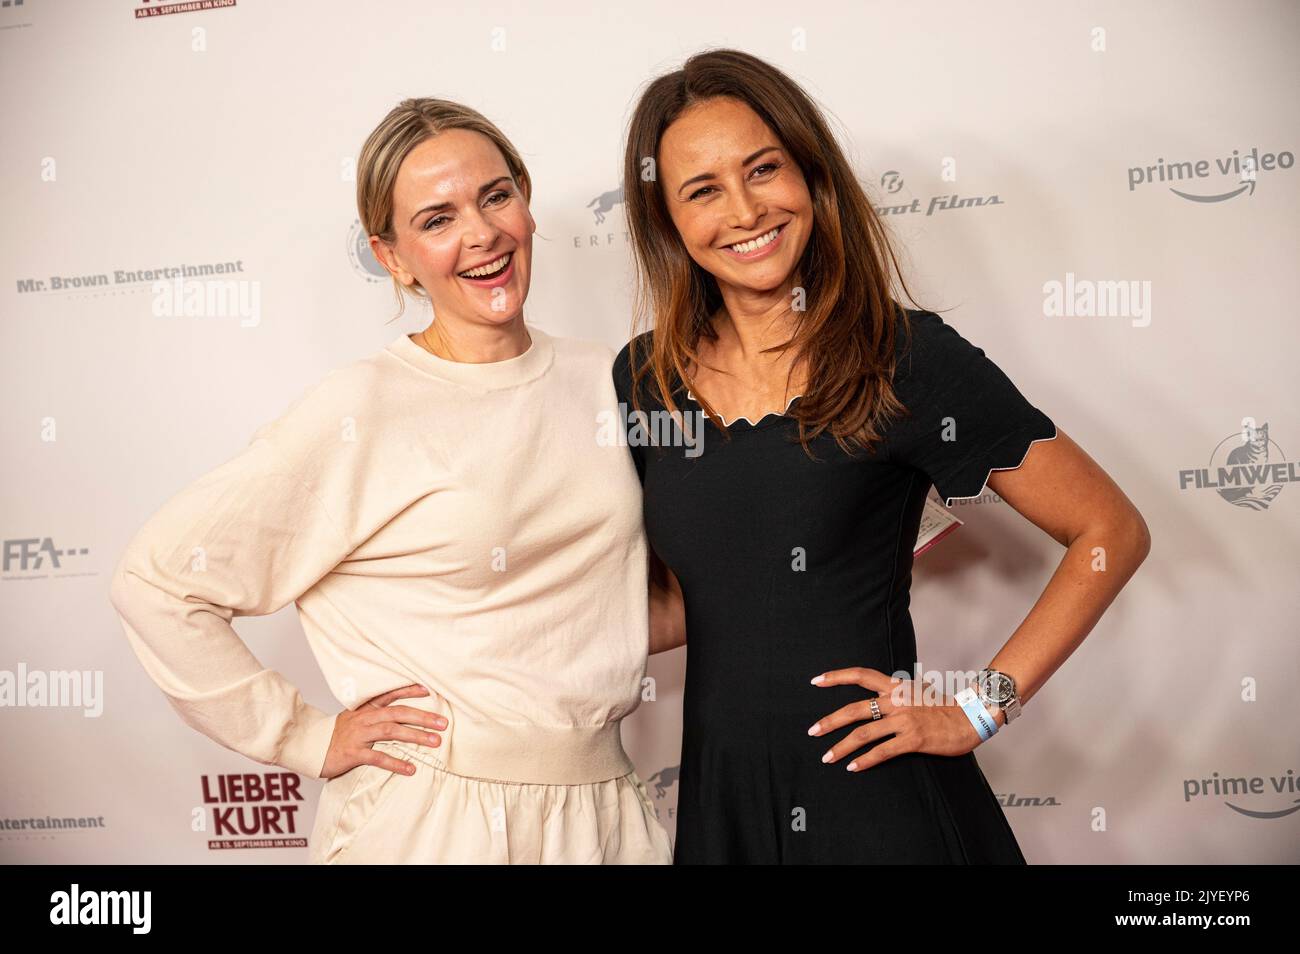 Berlin, Germany. 07th Sep, 2022. Actress Denise Zich (l) and actress Sinta Weisz arrive at the world premiere of the Schweiger film 'Lieber Kurt'. The film opens in theaters on Sept. 15, 2022. Credit: Fabian Sommer/dpa/Alamy Live News Stock Photo